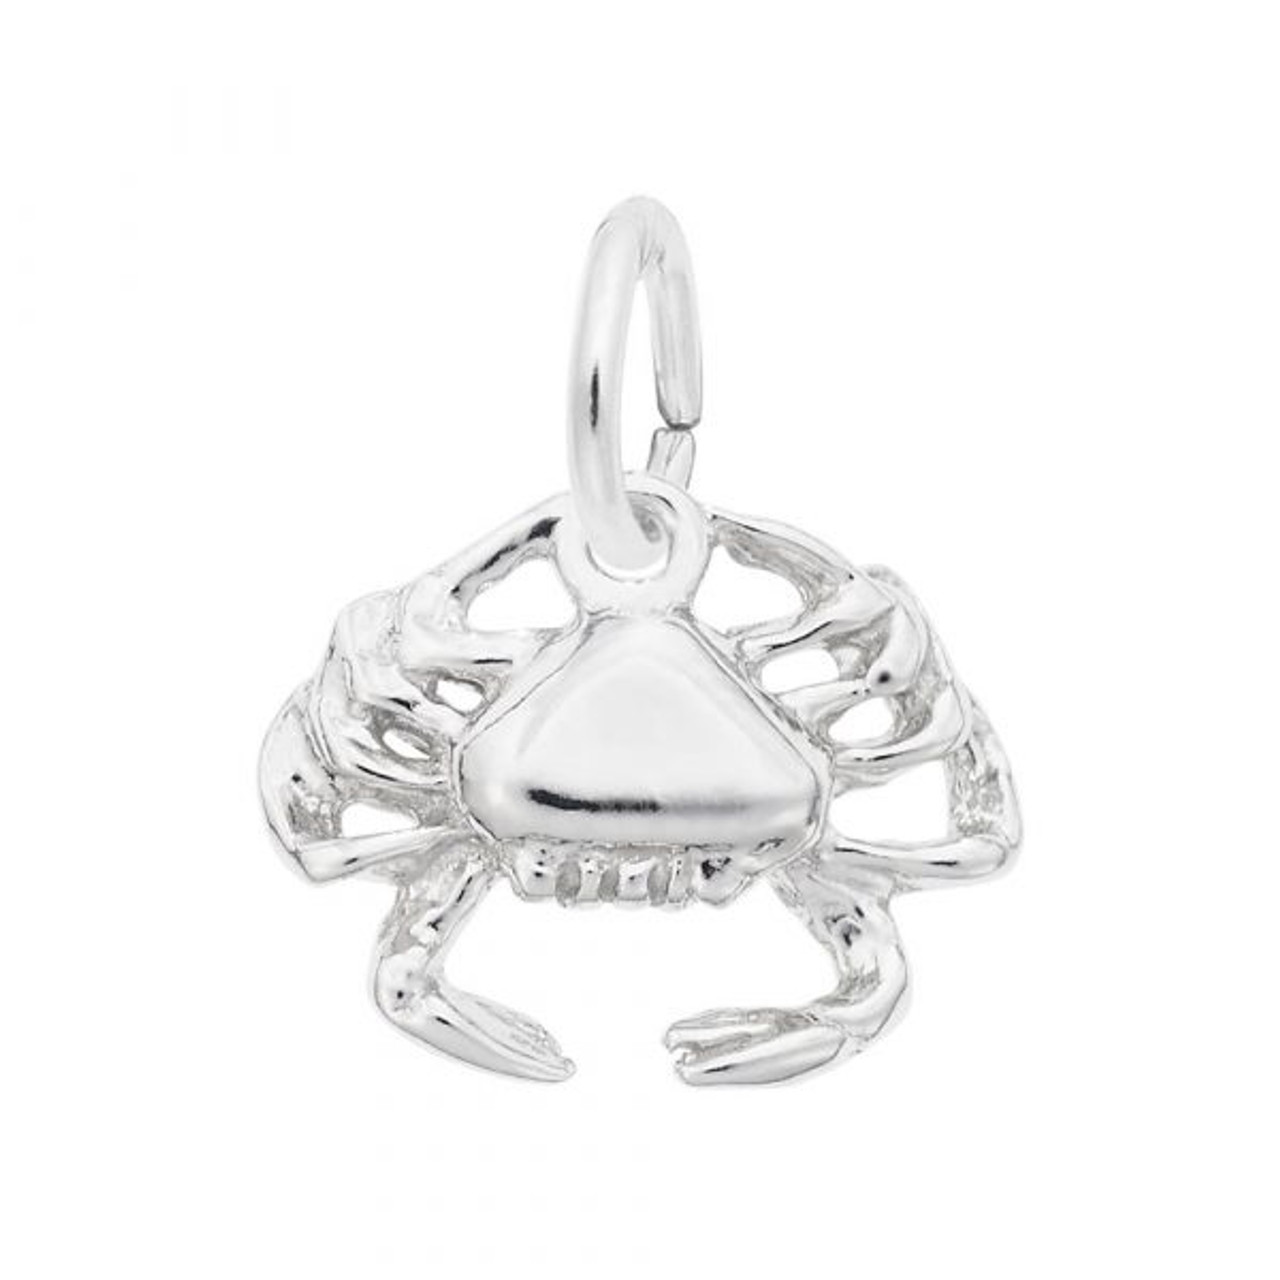 Crab Accent Silver Charm - Sterling Silver and 14k White Gold